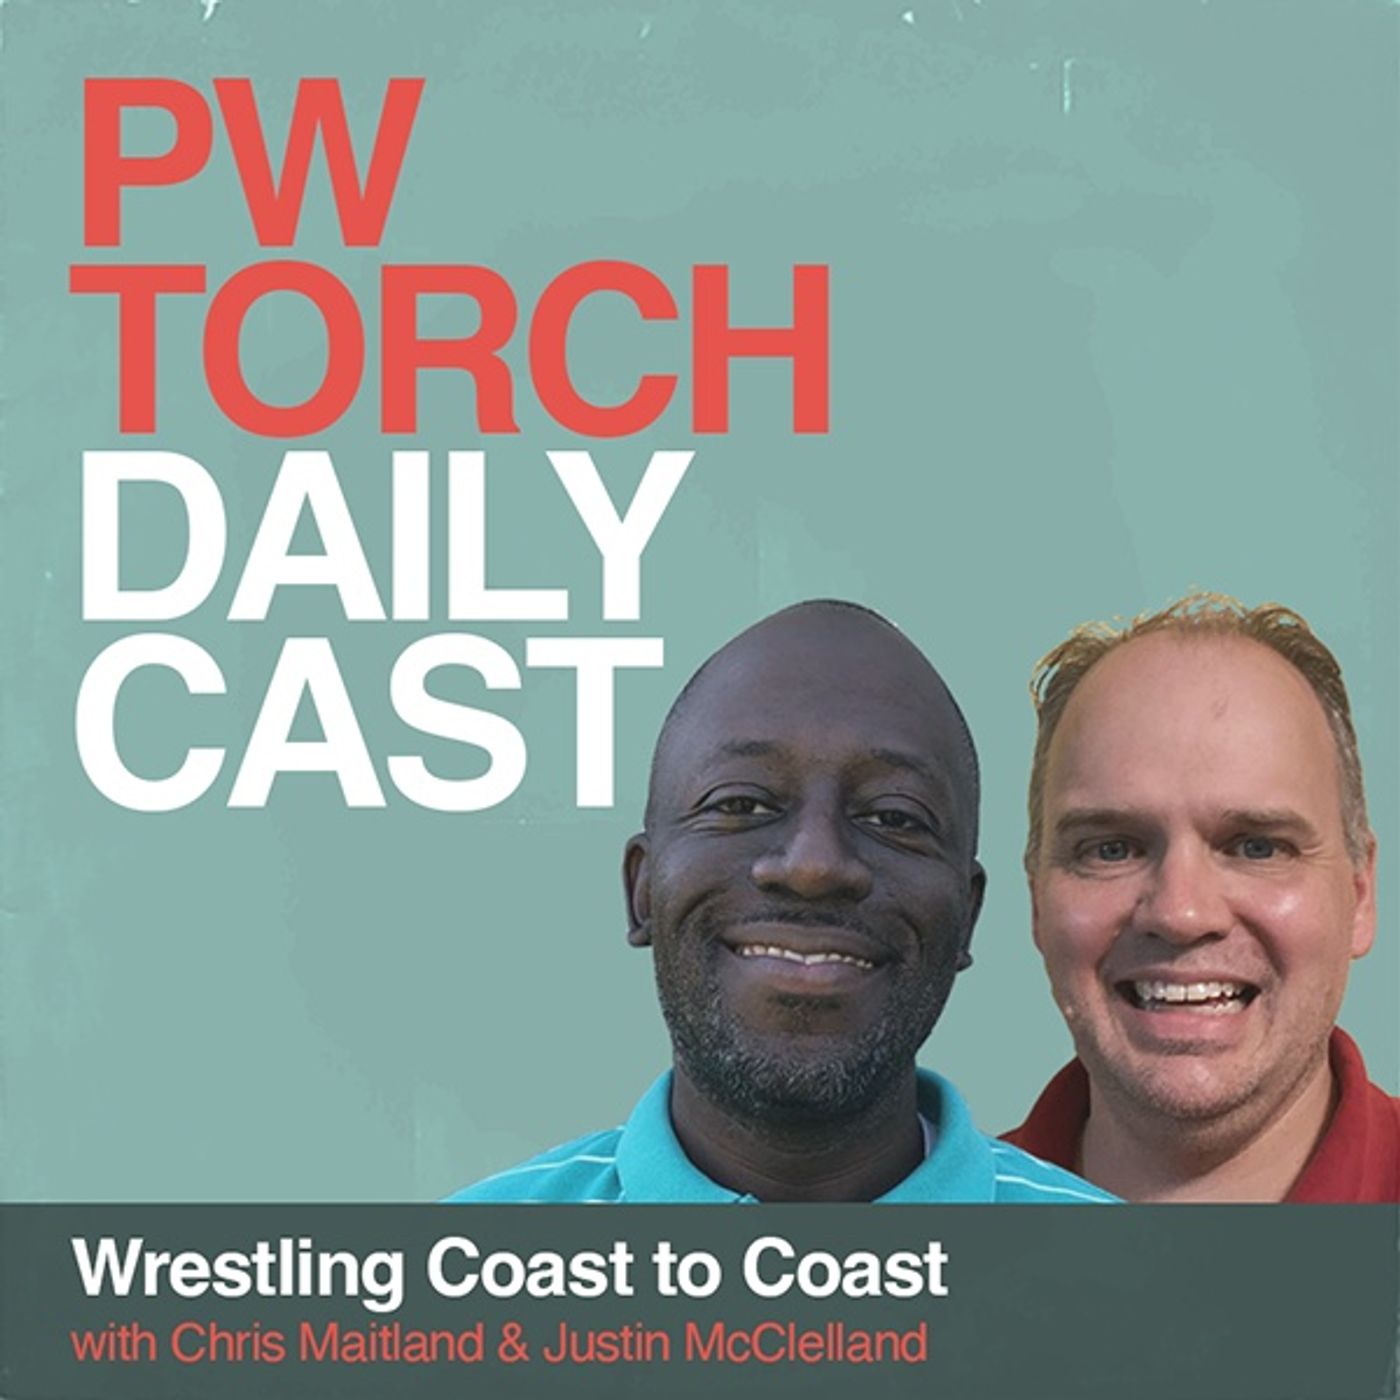 Wrestling Coast to Coast - Maitland & McClelland interview MLW’s Jake Crist and Tony Deppen, report from Wrestling Revolver’s Mox vs. Gringo